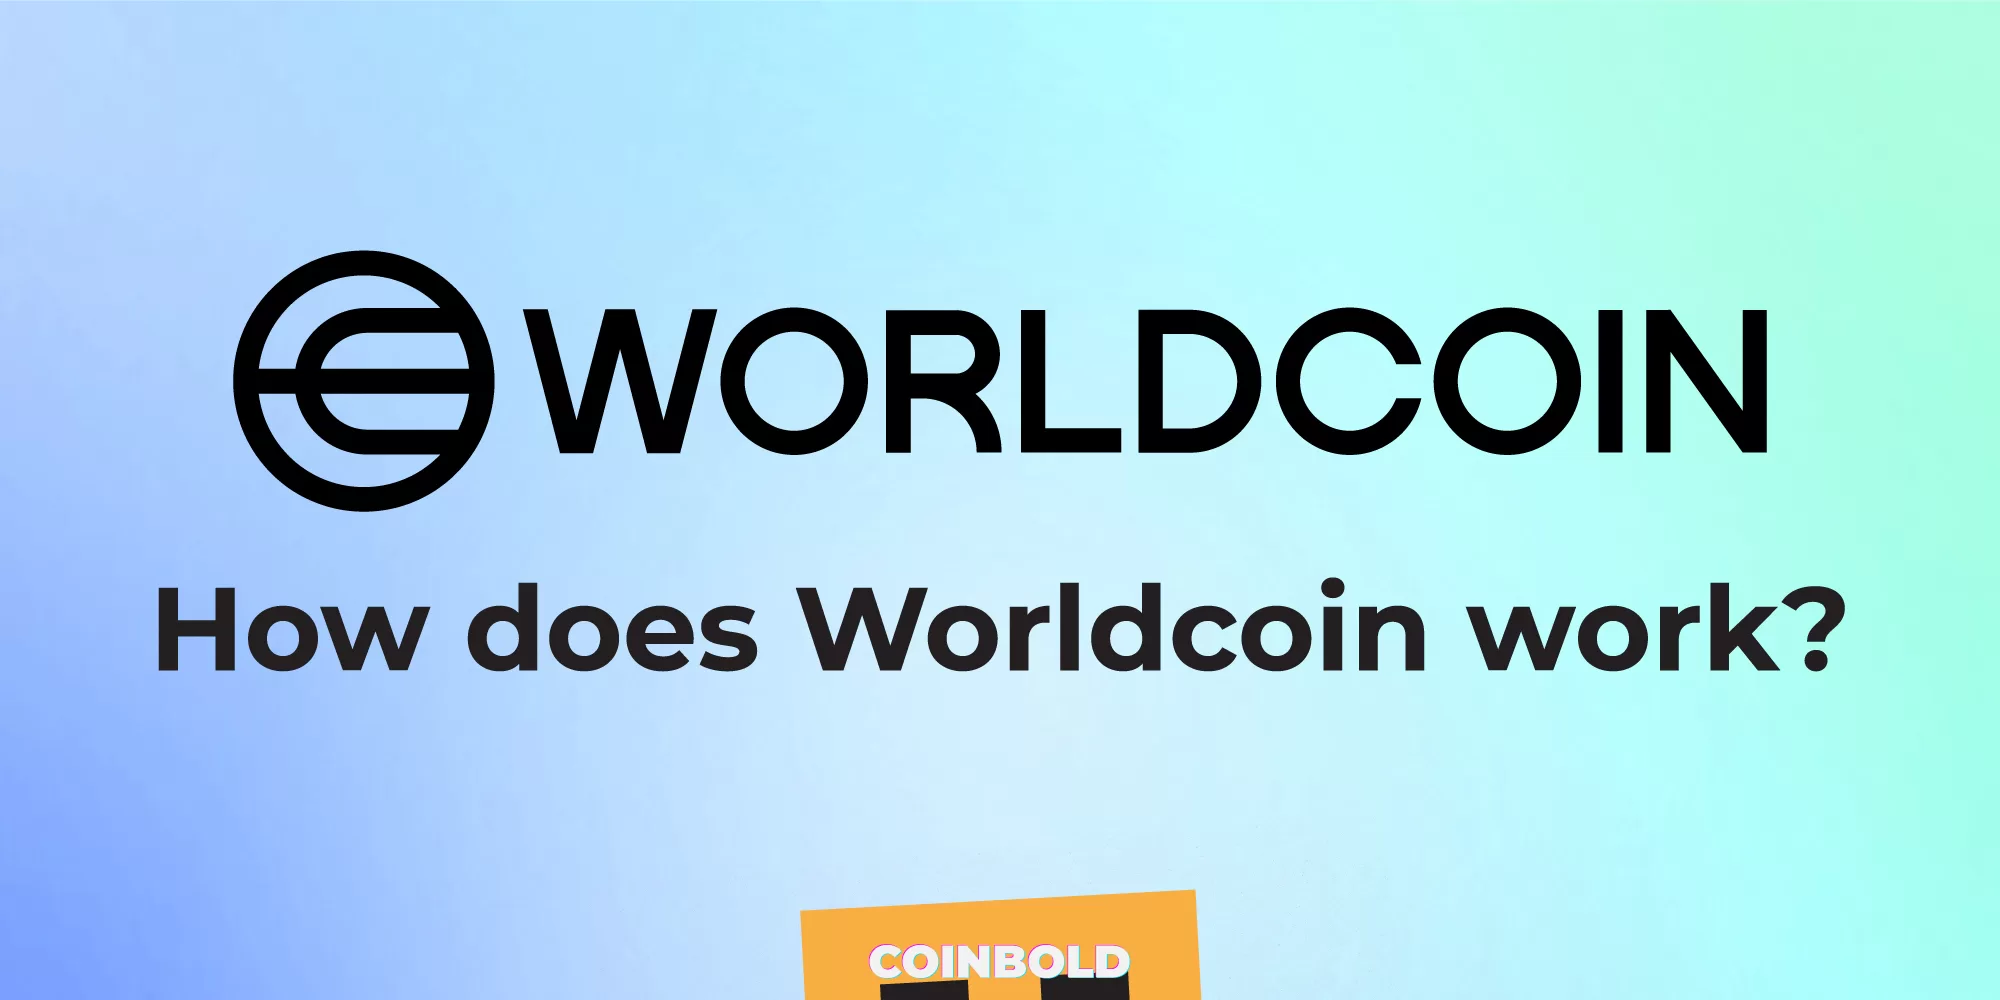 How does Worldcoin work?